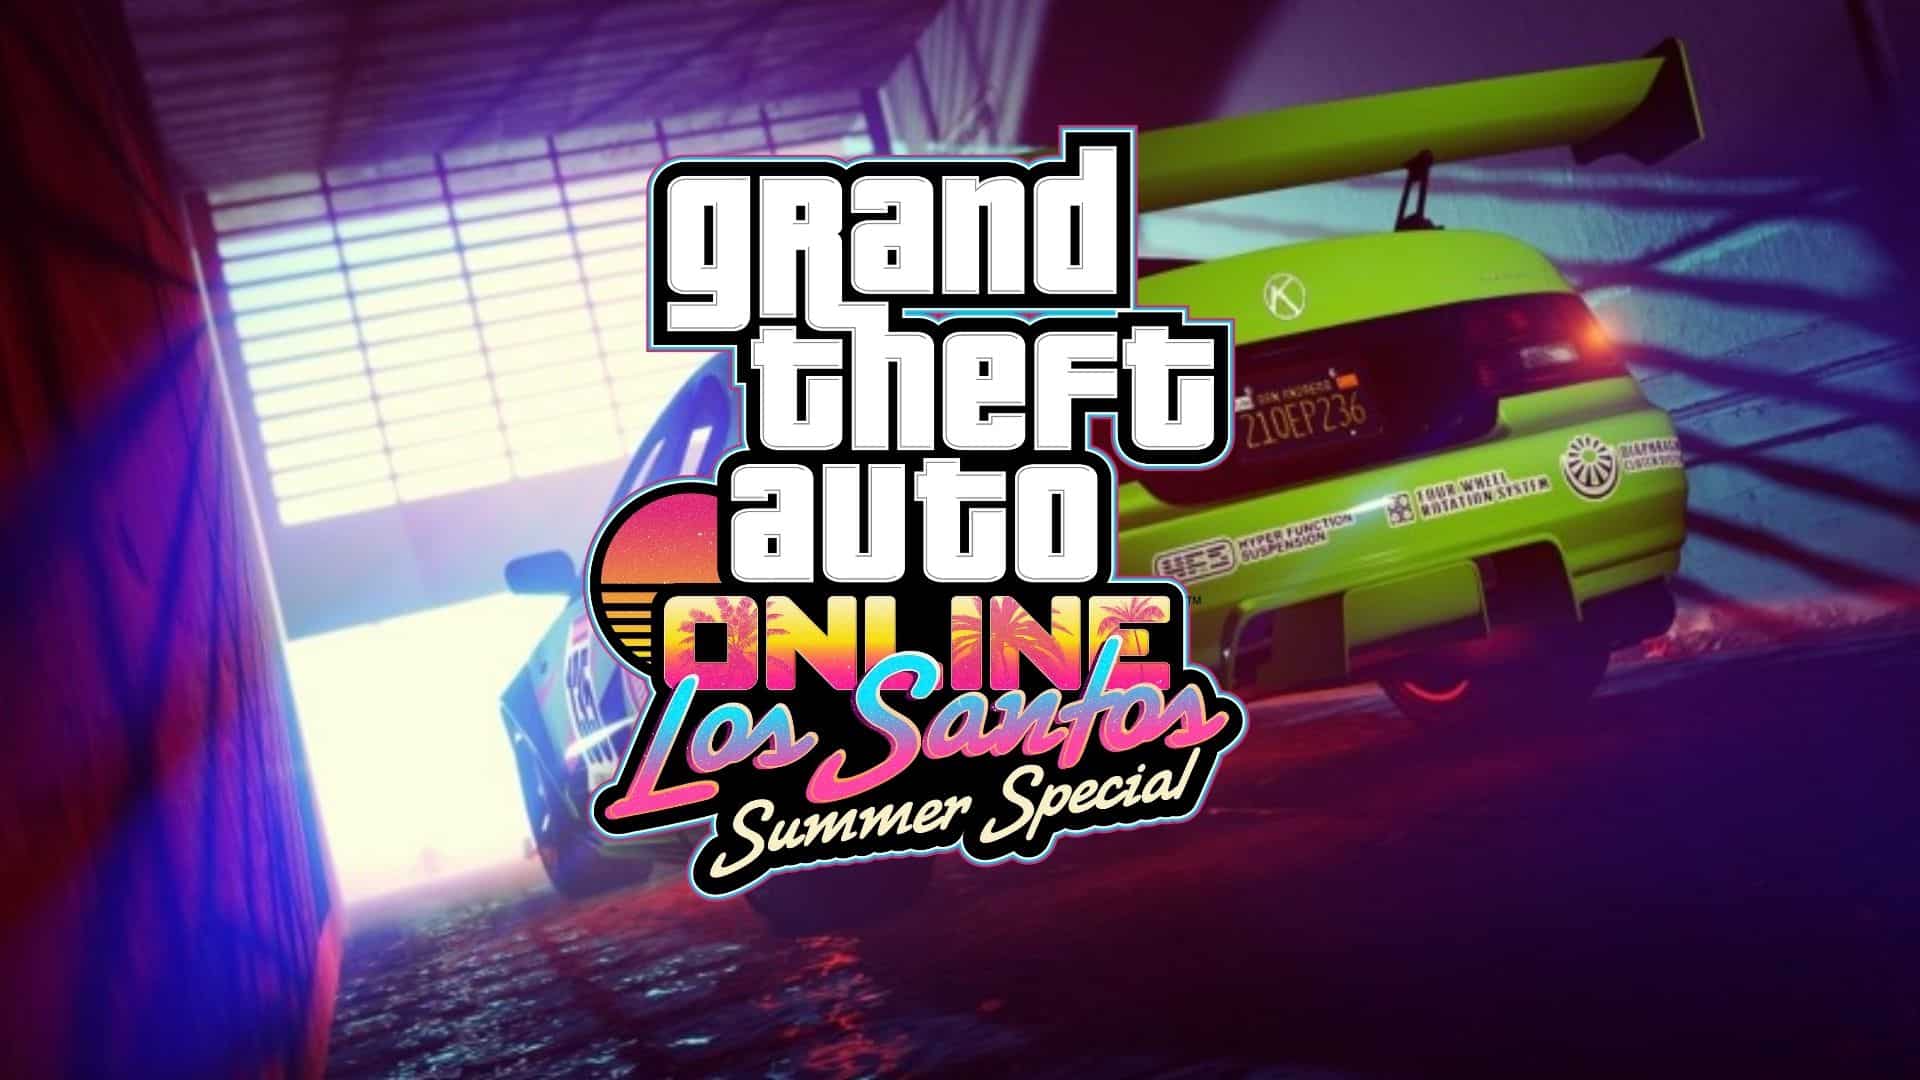 GTA Online summer special logo and green race car